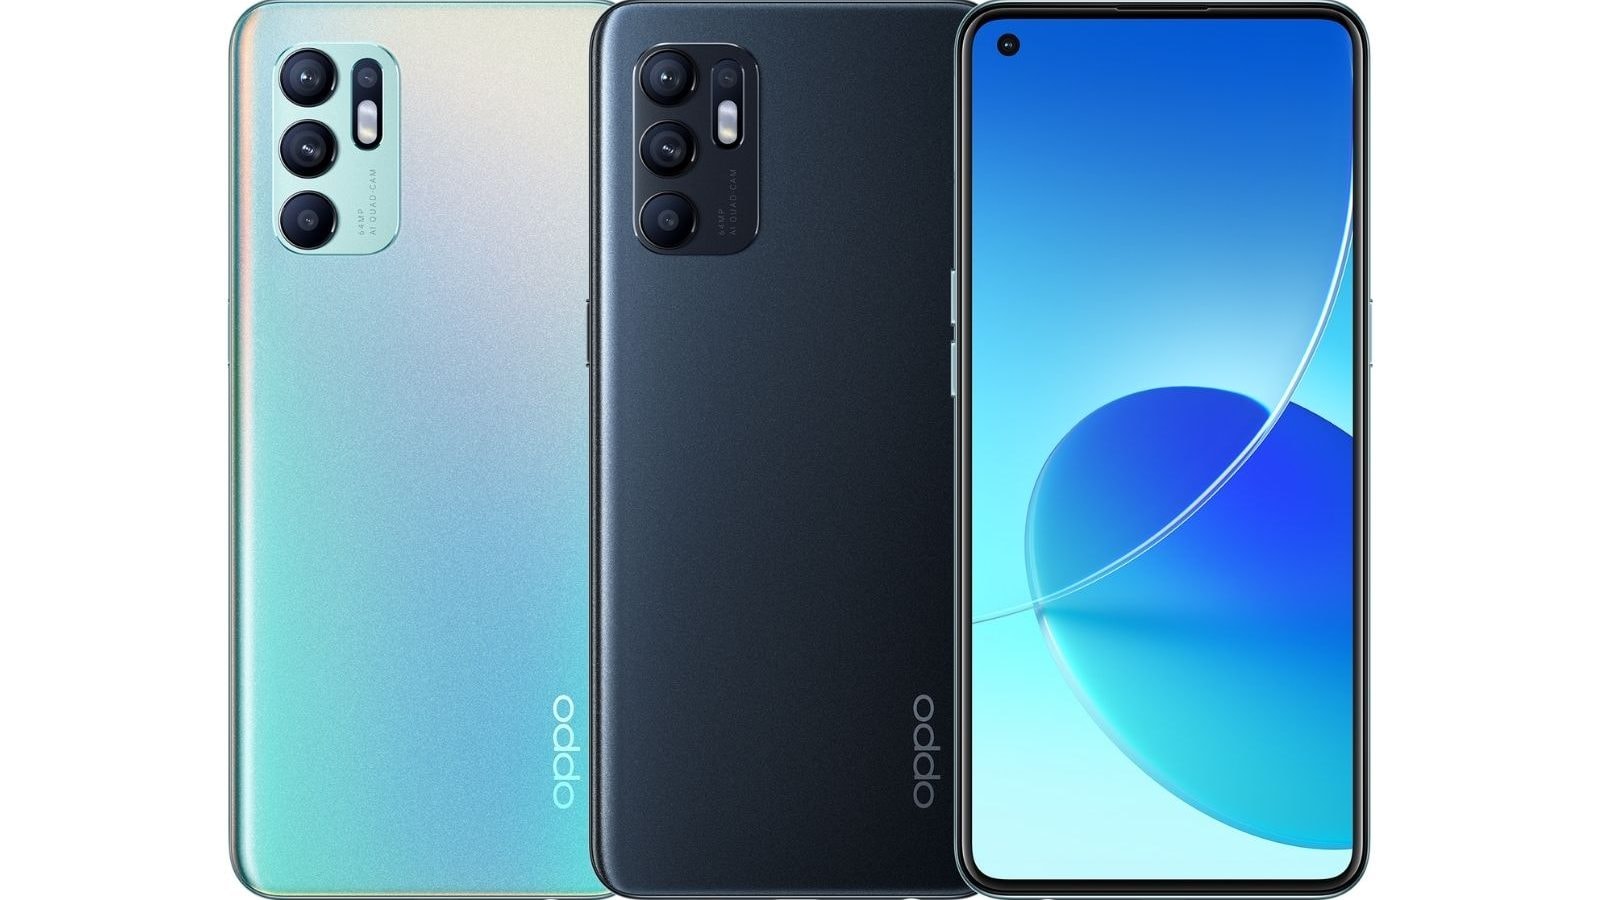 Oppo Reno 6 4G With Quad Cameras, Snapdragon 720G SoC Launched